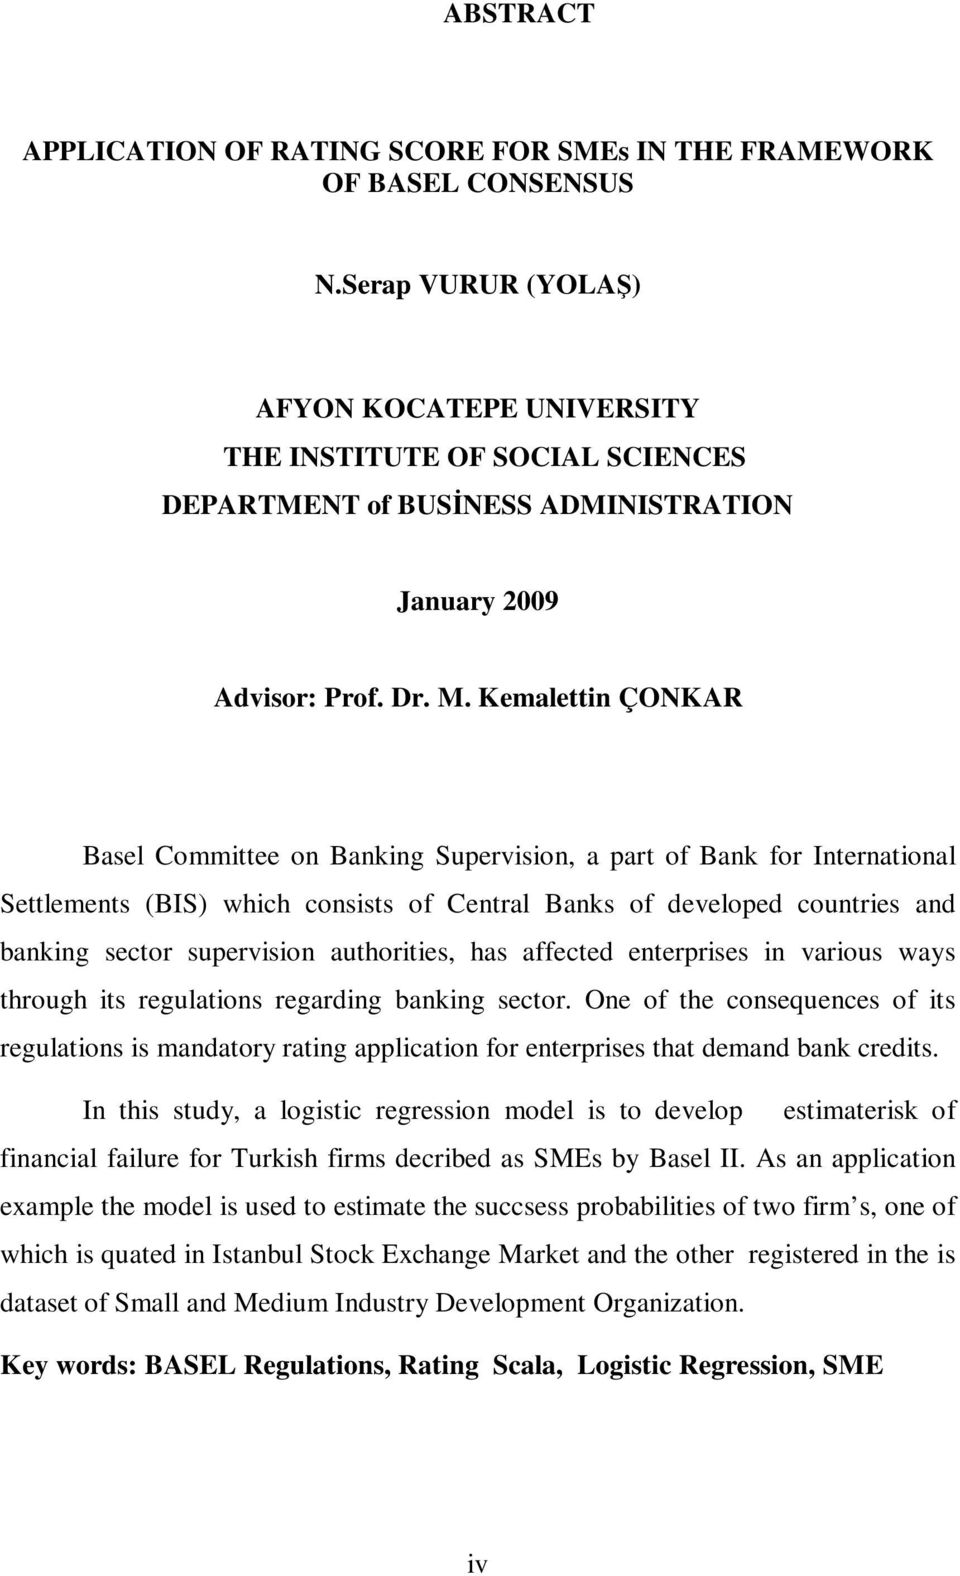 Kemalettin ÇONKAR Basel Committee on Banking Supervision, a part of Bank for International Settlements (BIS) which consists of Central Banks of developed countries and banking sector supervision